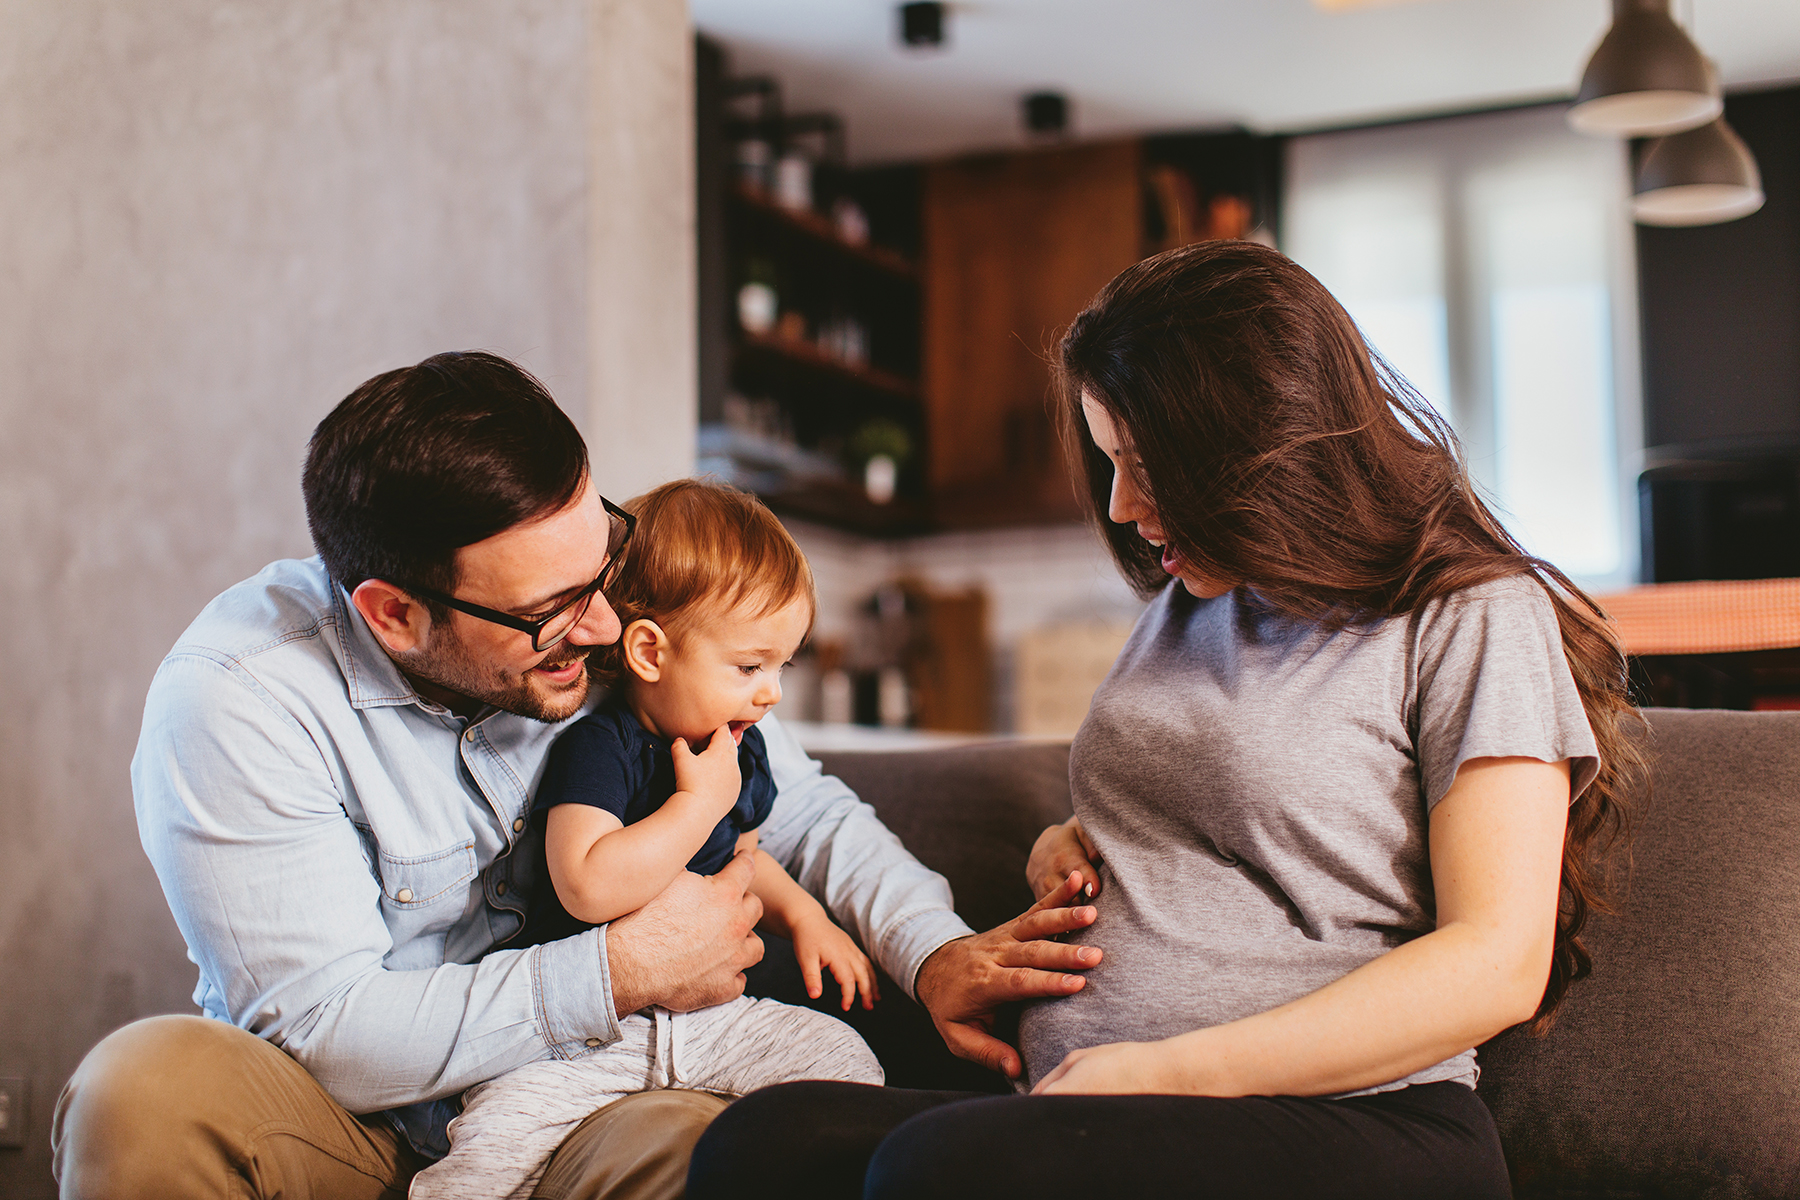 An image of two parents, mother and father, sitting with their toddler on a sofa. The mother is pregnant and talking to her child about the arrival of a new baby